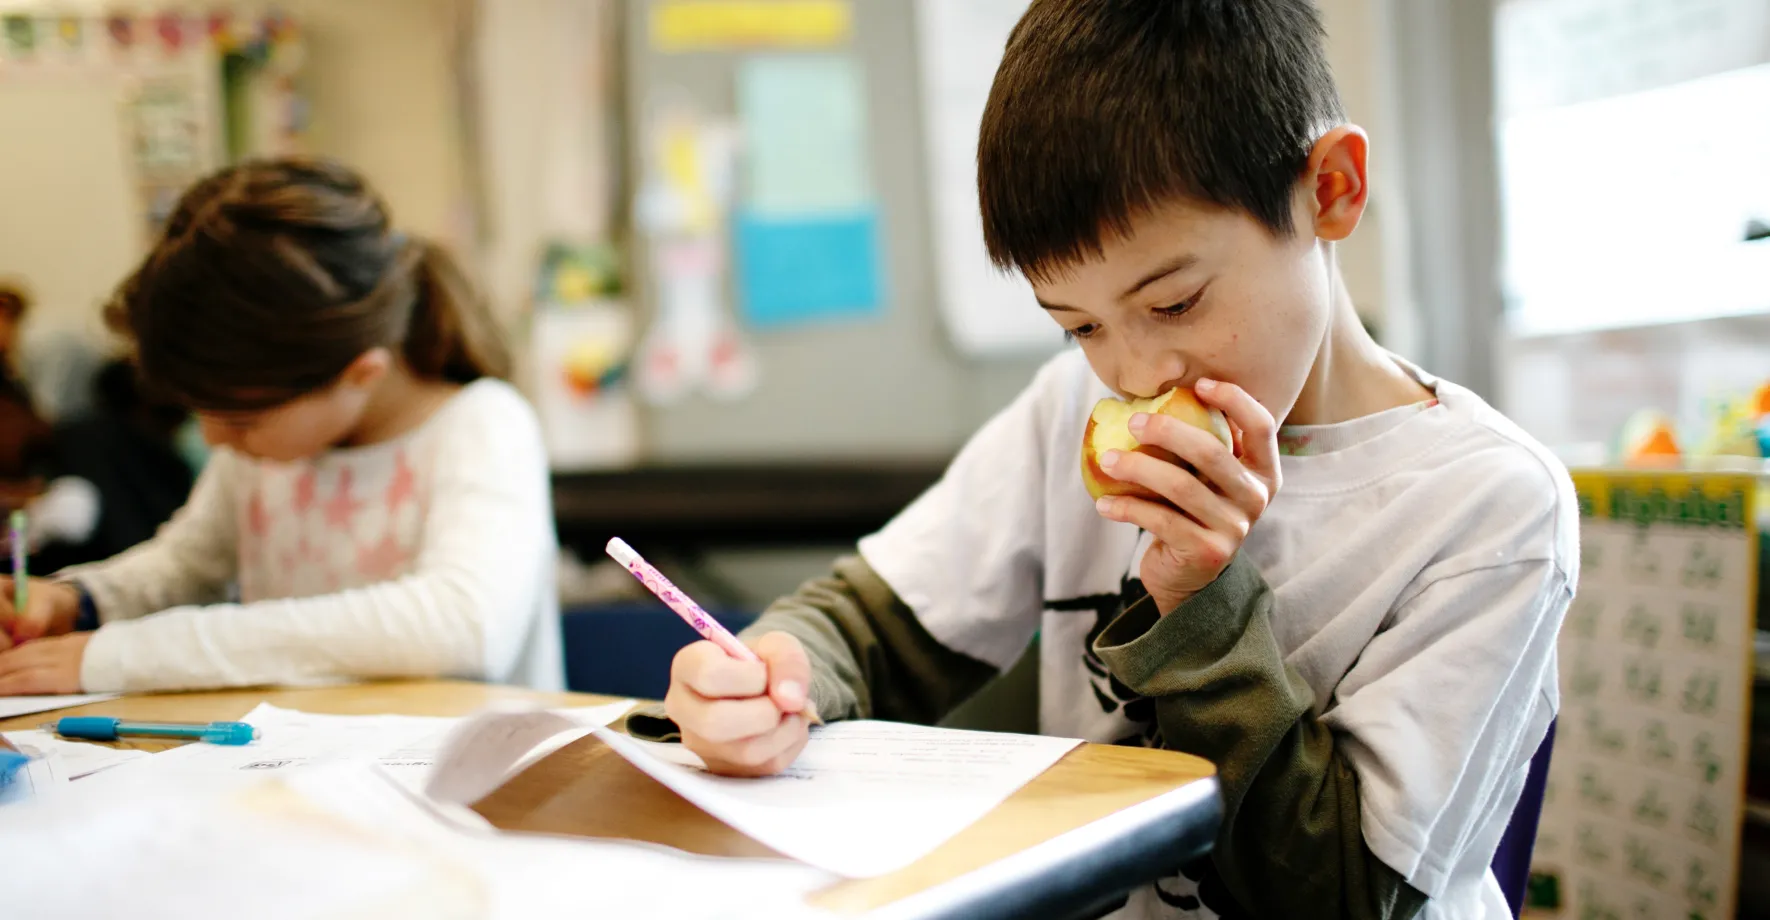 Little boy eating an apple while working on schoolwork in the classroom.